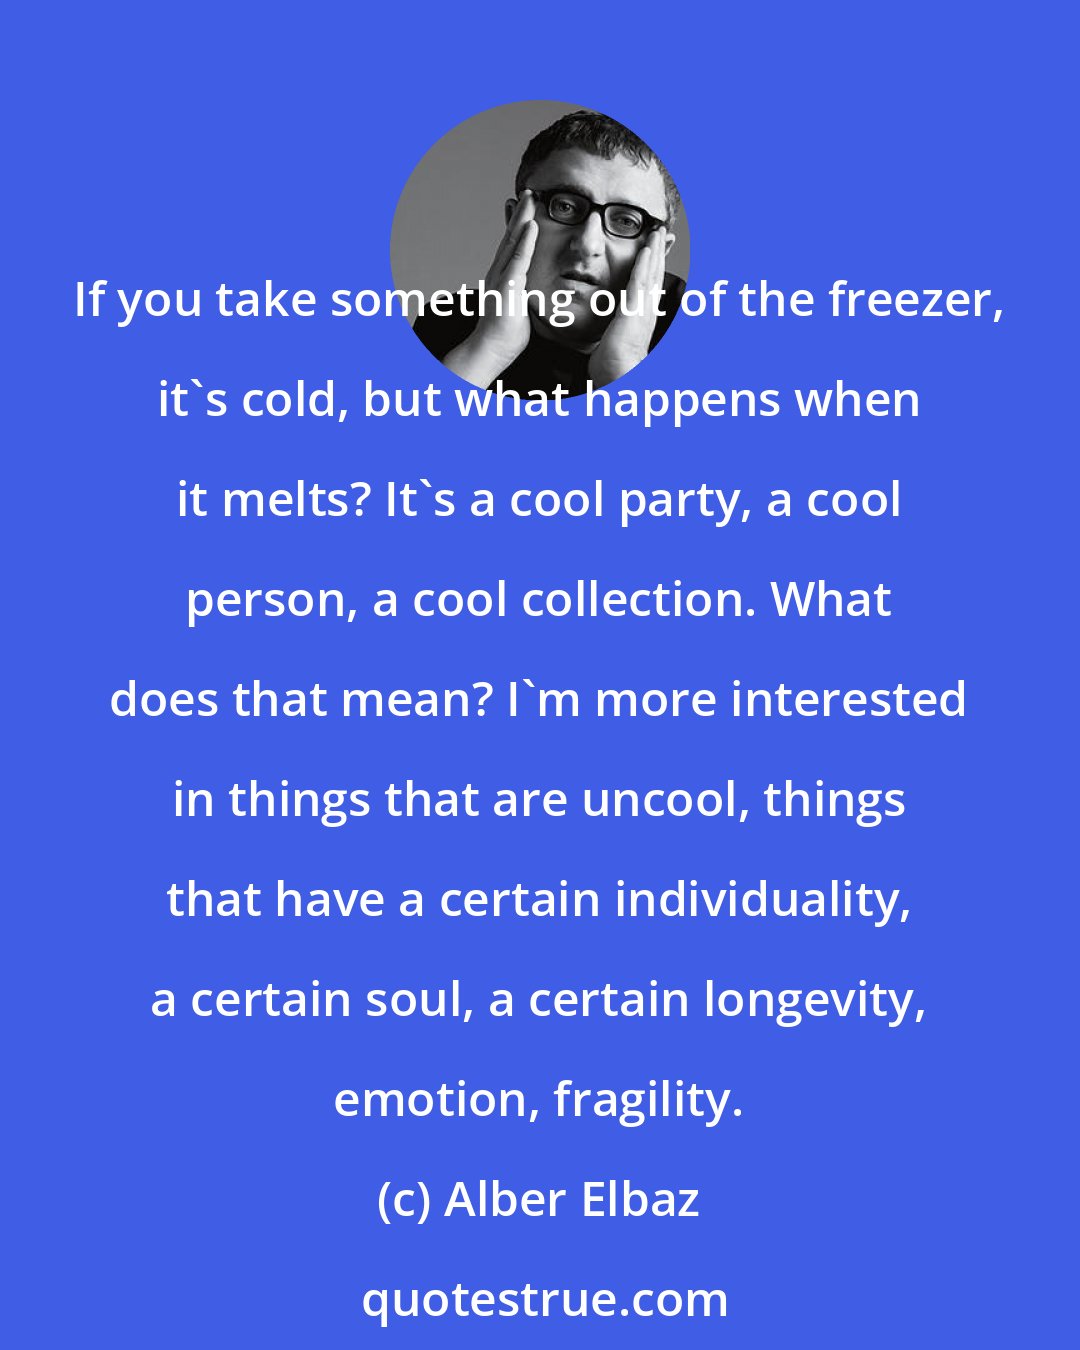 Alber Elbaz: If you take something out of the freezer, it's cold, but what happens when it melts? It's a cool party, a cool person, a cool collection. What does that mean? I'm more interested in things that are uncool, things that have a certain individuality, a certain soul, a certain longevity, emotion, fragility.